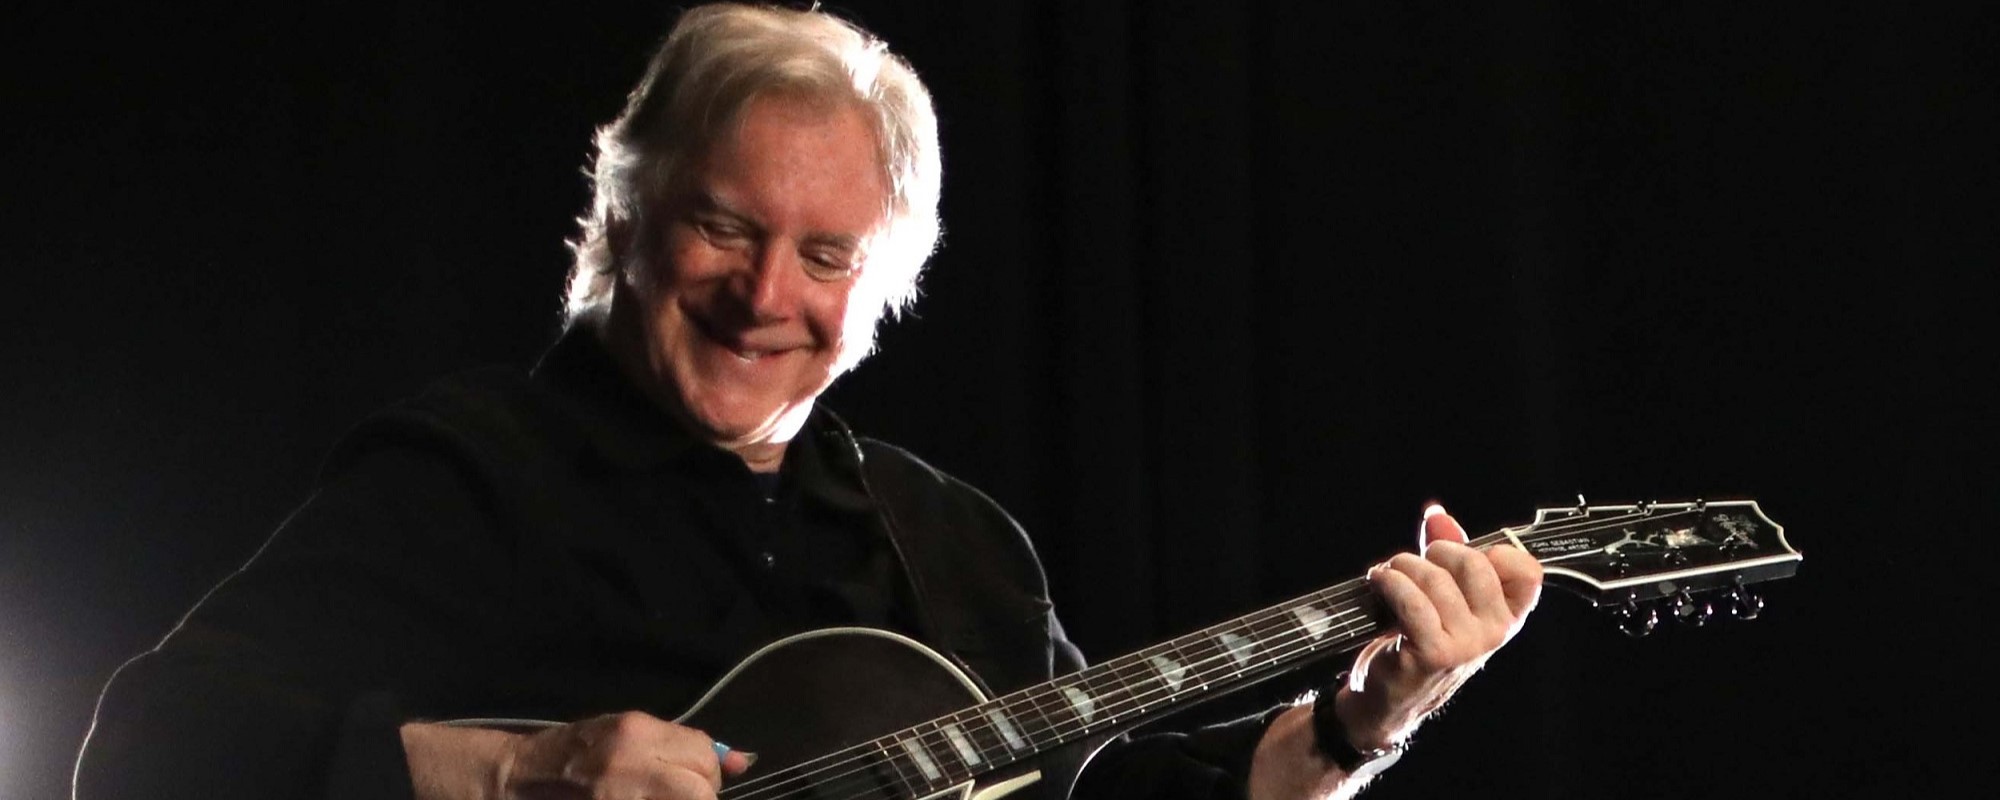 5 Must-Know Facts About The Lovin’ Spoonful’s John Sebastian in Honor of His 80th Birthday